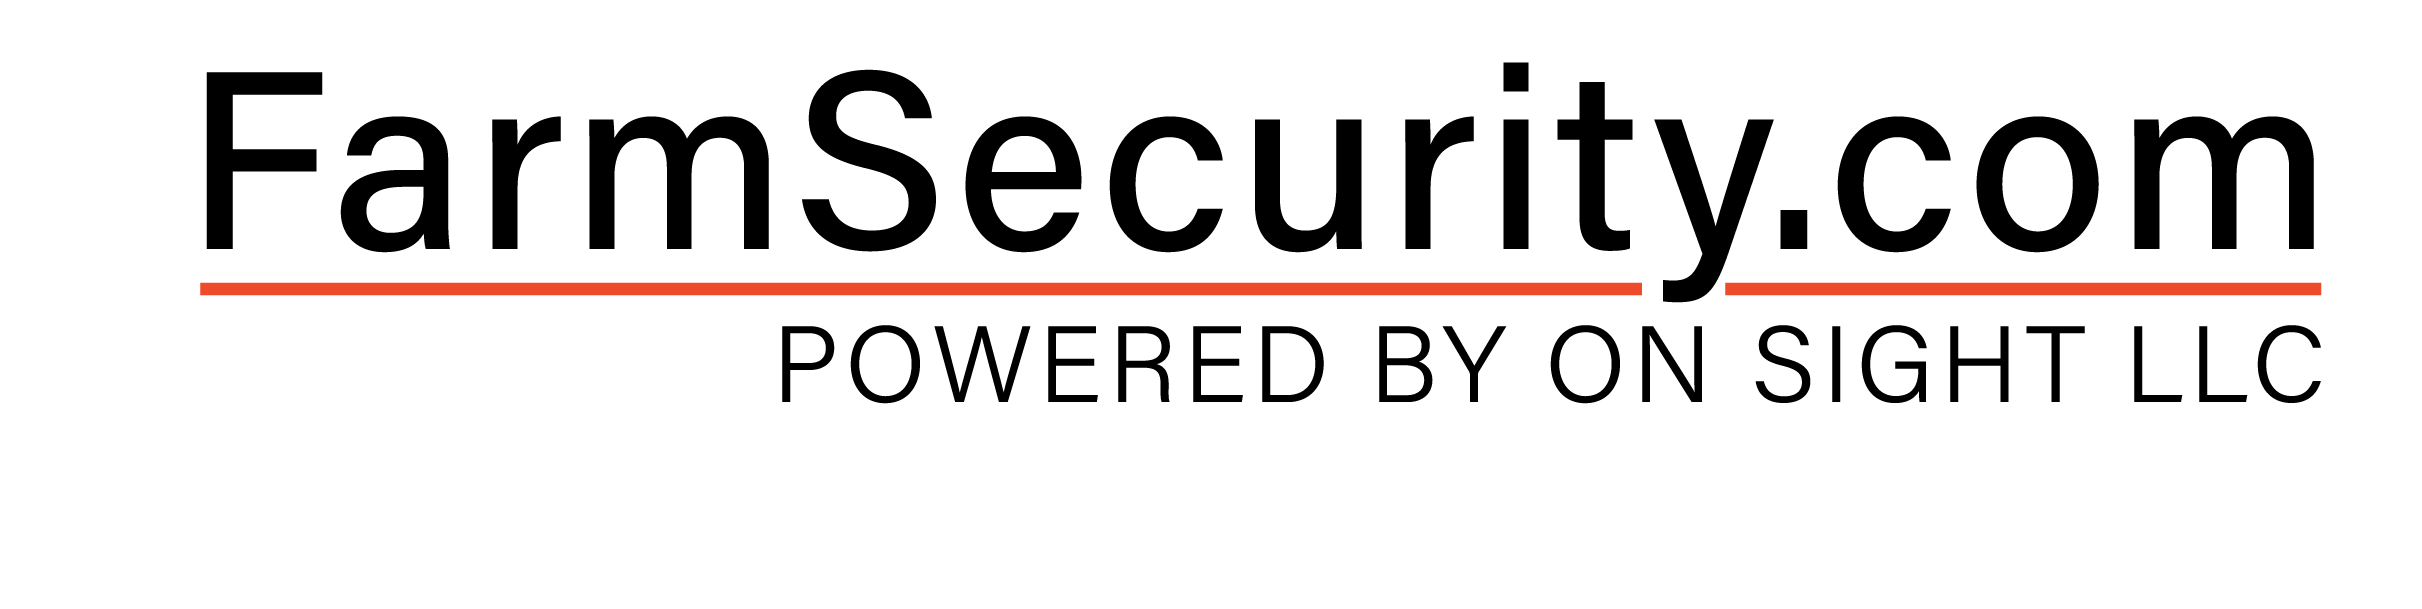 Farm Security Powered By On Sight 24/7